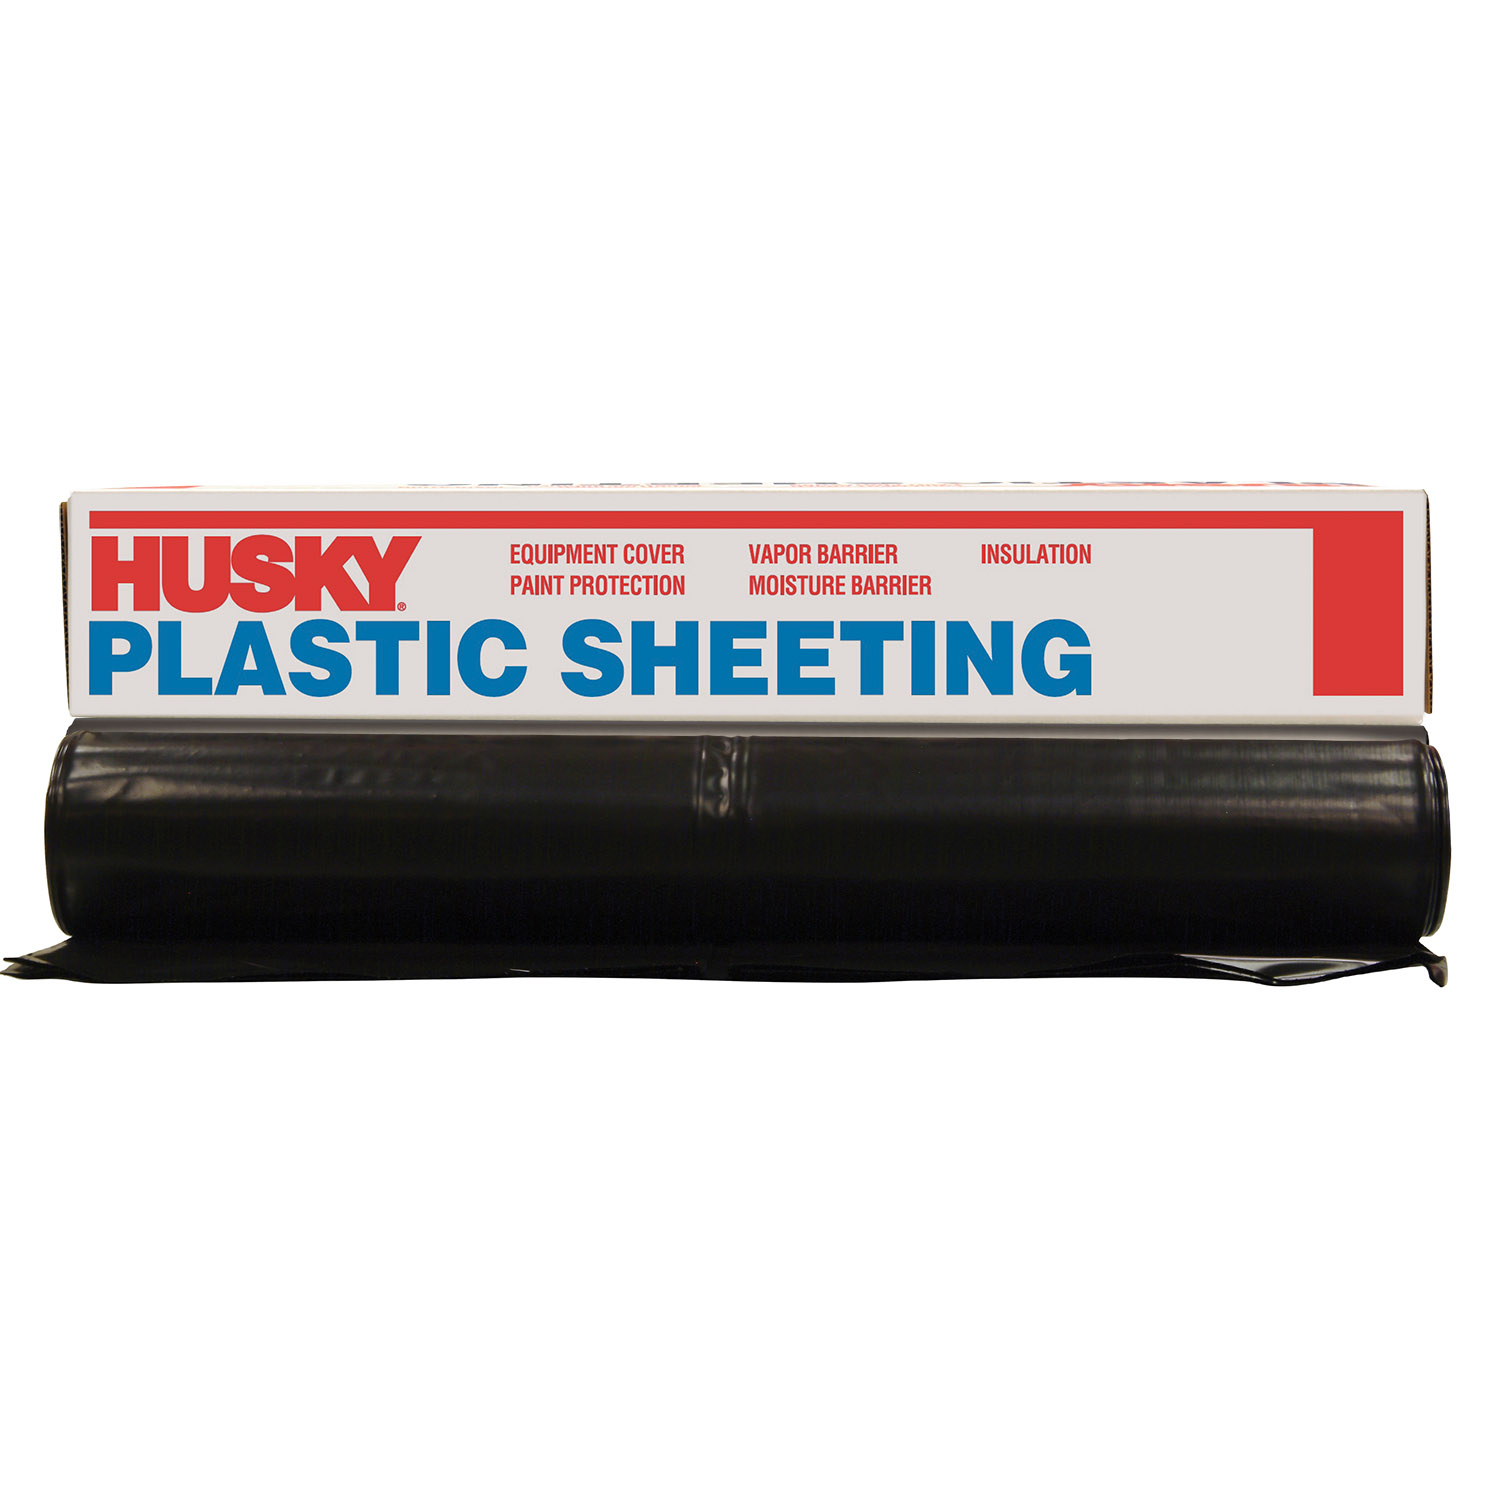 Husky Contractor Trash Bags, 42 gal, 32.75 in x 45.125 in, 3 mil